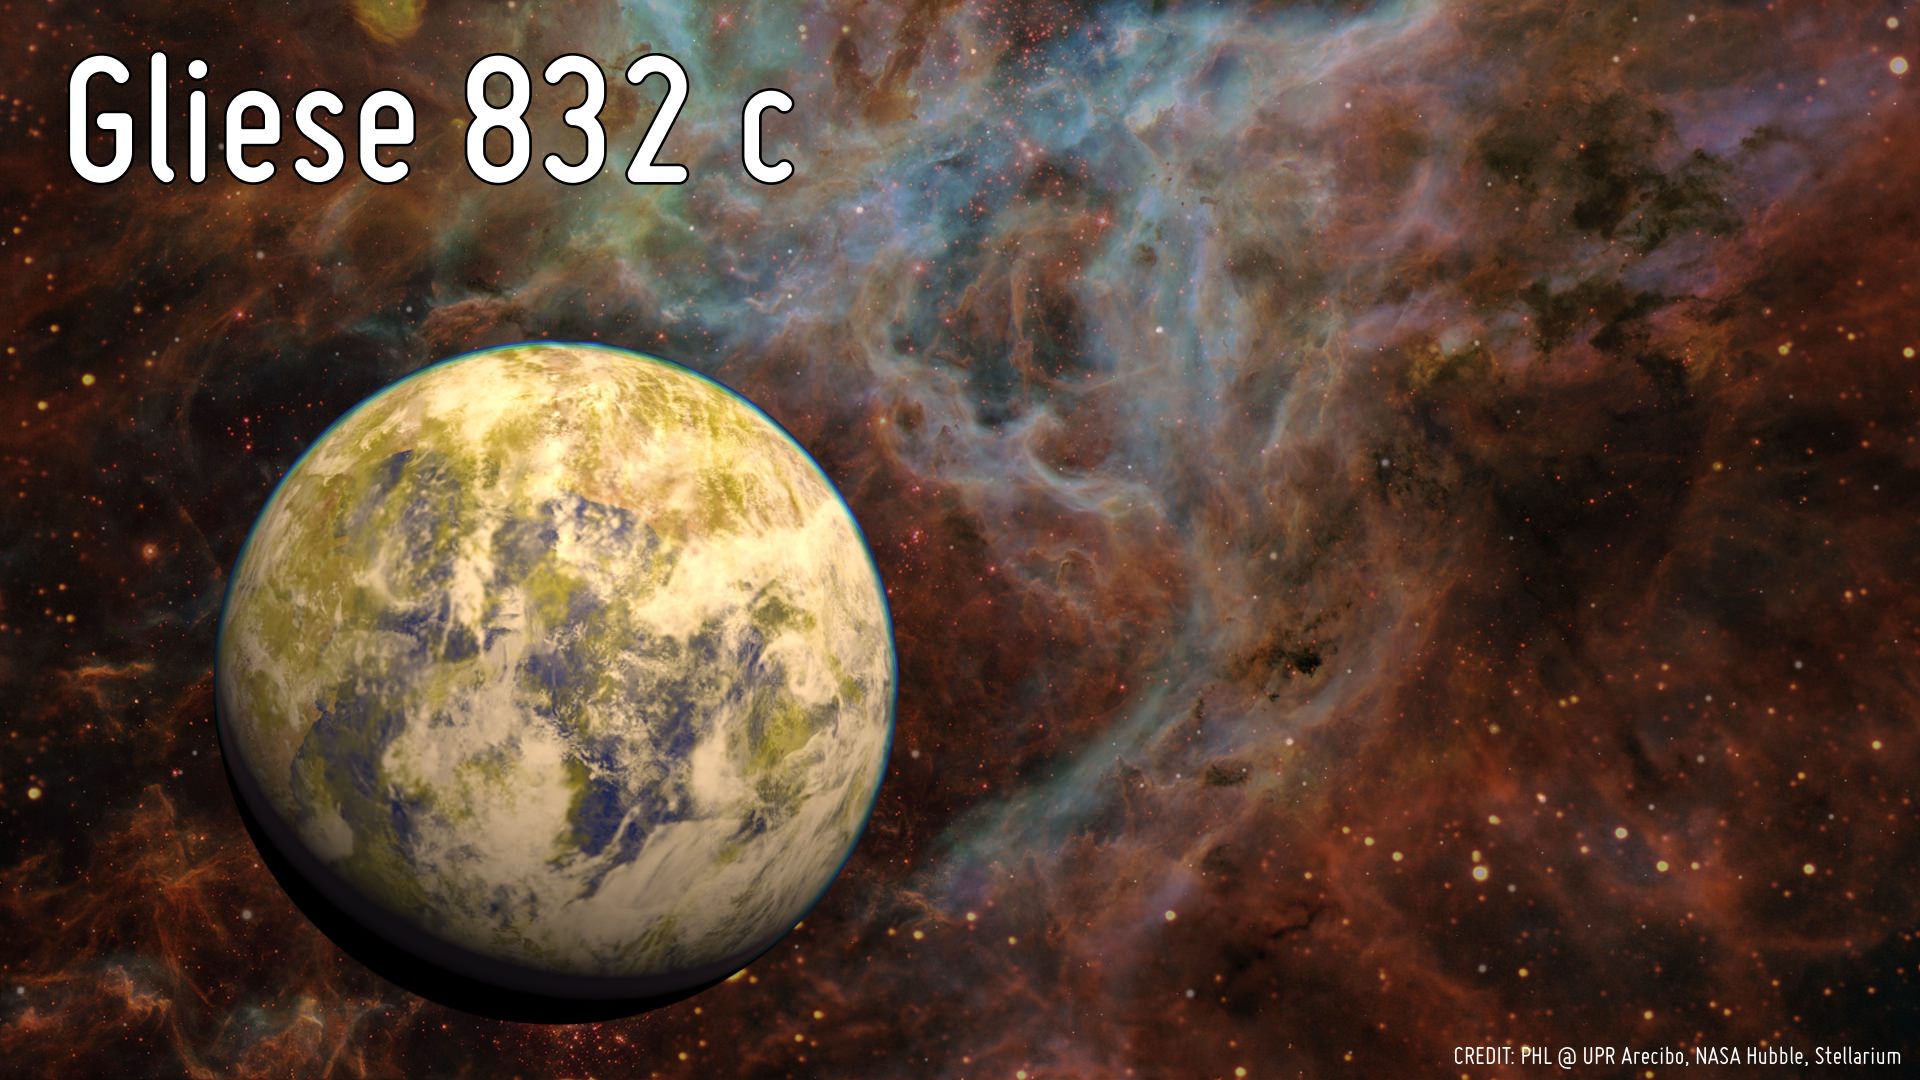 An artistic representation of Gliese 832 c against a stellar nebula background. A new paper says Gliese 832 might be home to another planet similar to this, but in the habitable zone. Credit: Planetary Habitability Laboratory at the University of Puerto Rico, Arecibo, NASA/Hubble, Stellarium.